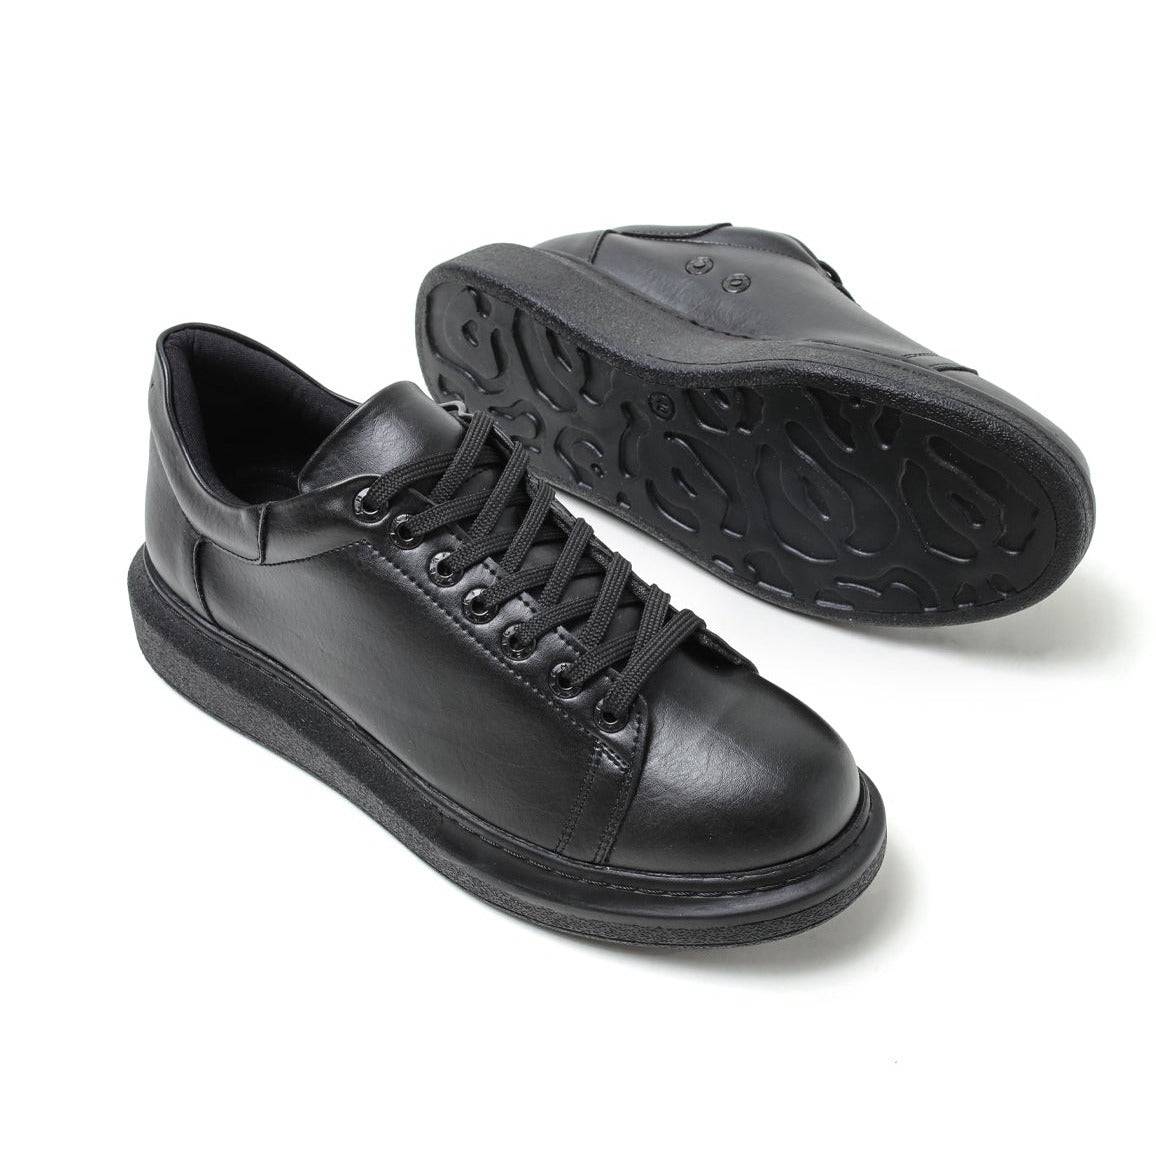 Low Top Casual Platform Sneakers for Women by Apollo Moda | Pluto Obsidian Black